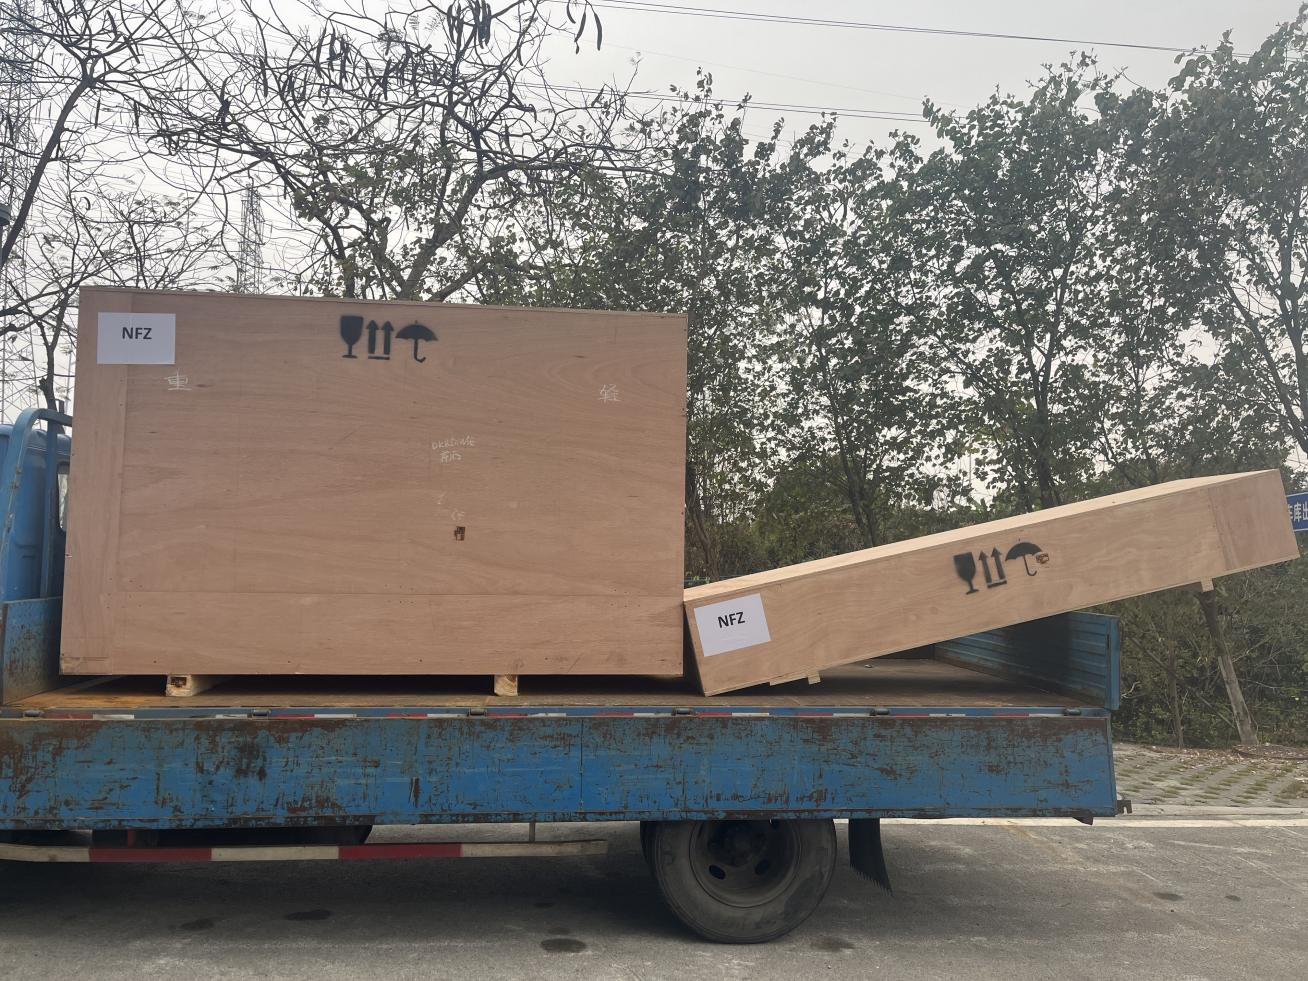 DK-850WXSE Pillow Packaging Machine has been shipped successfully